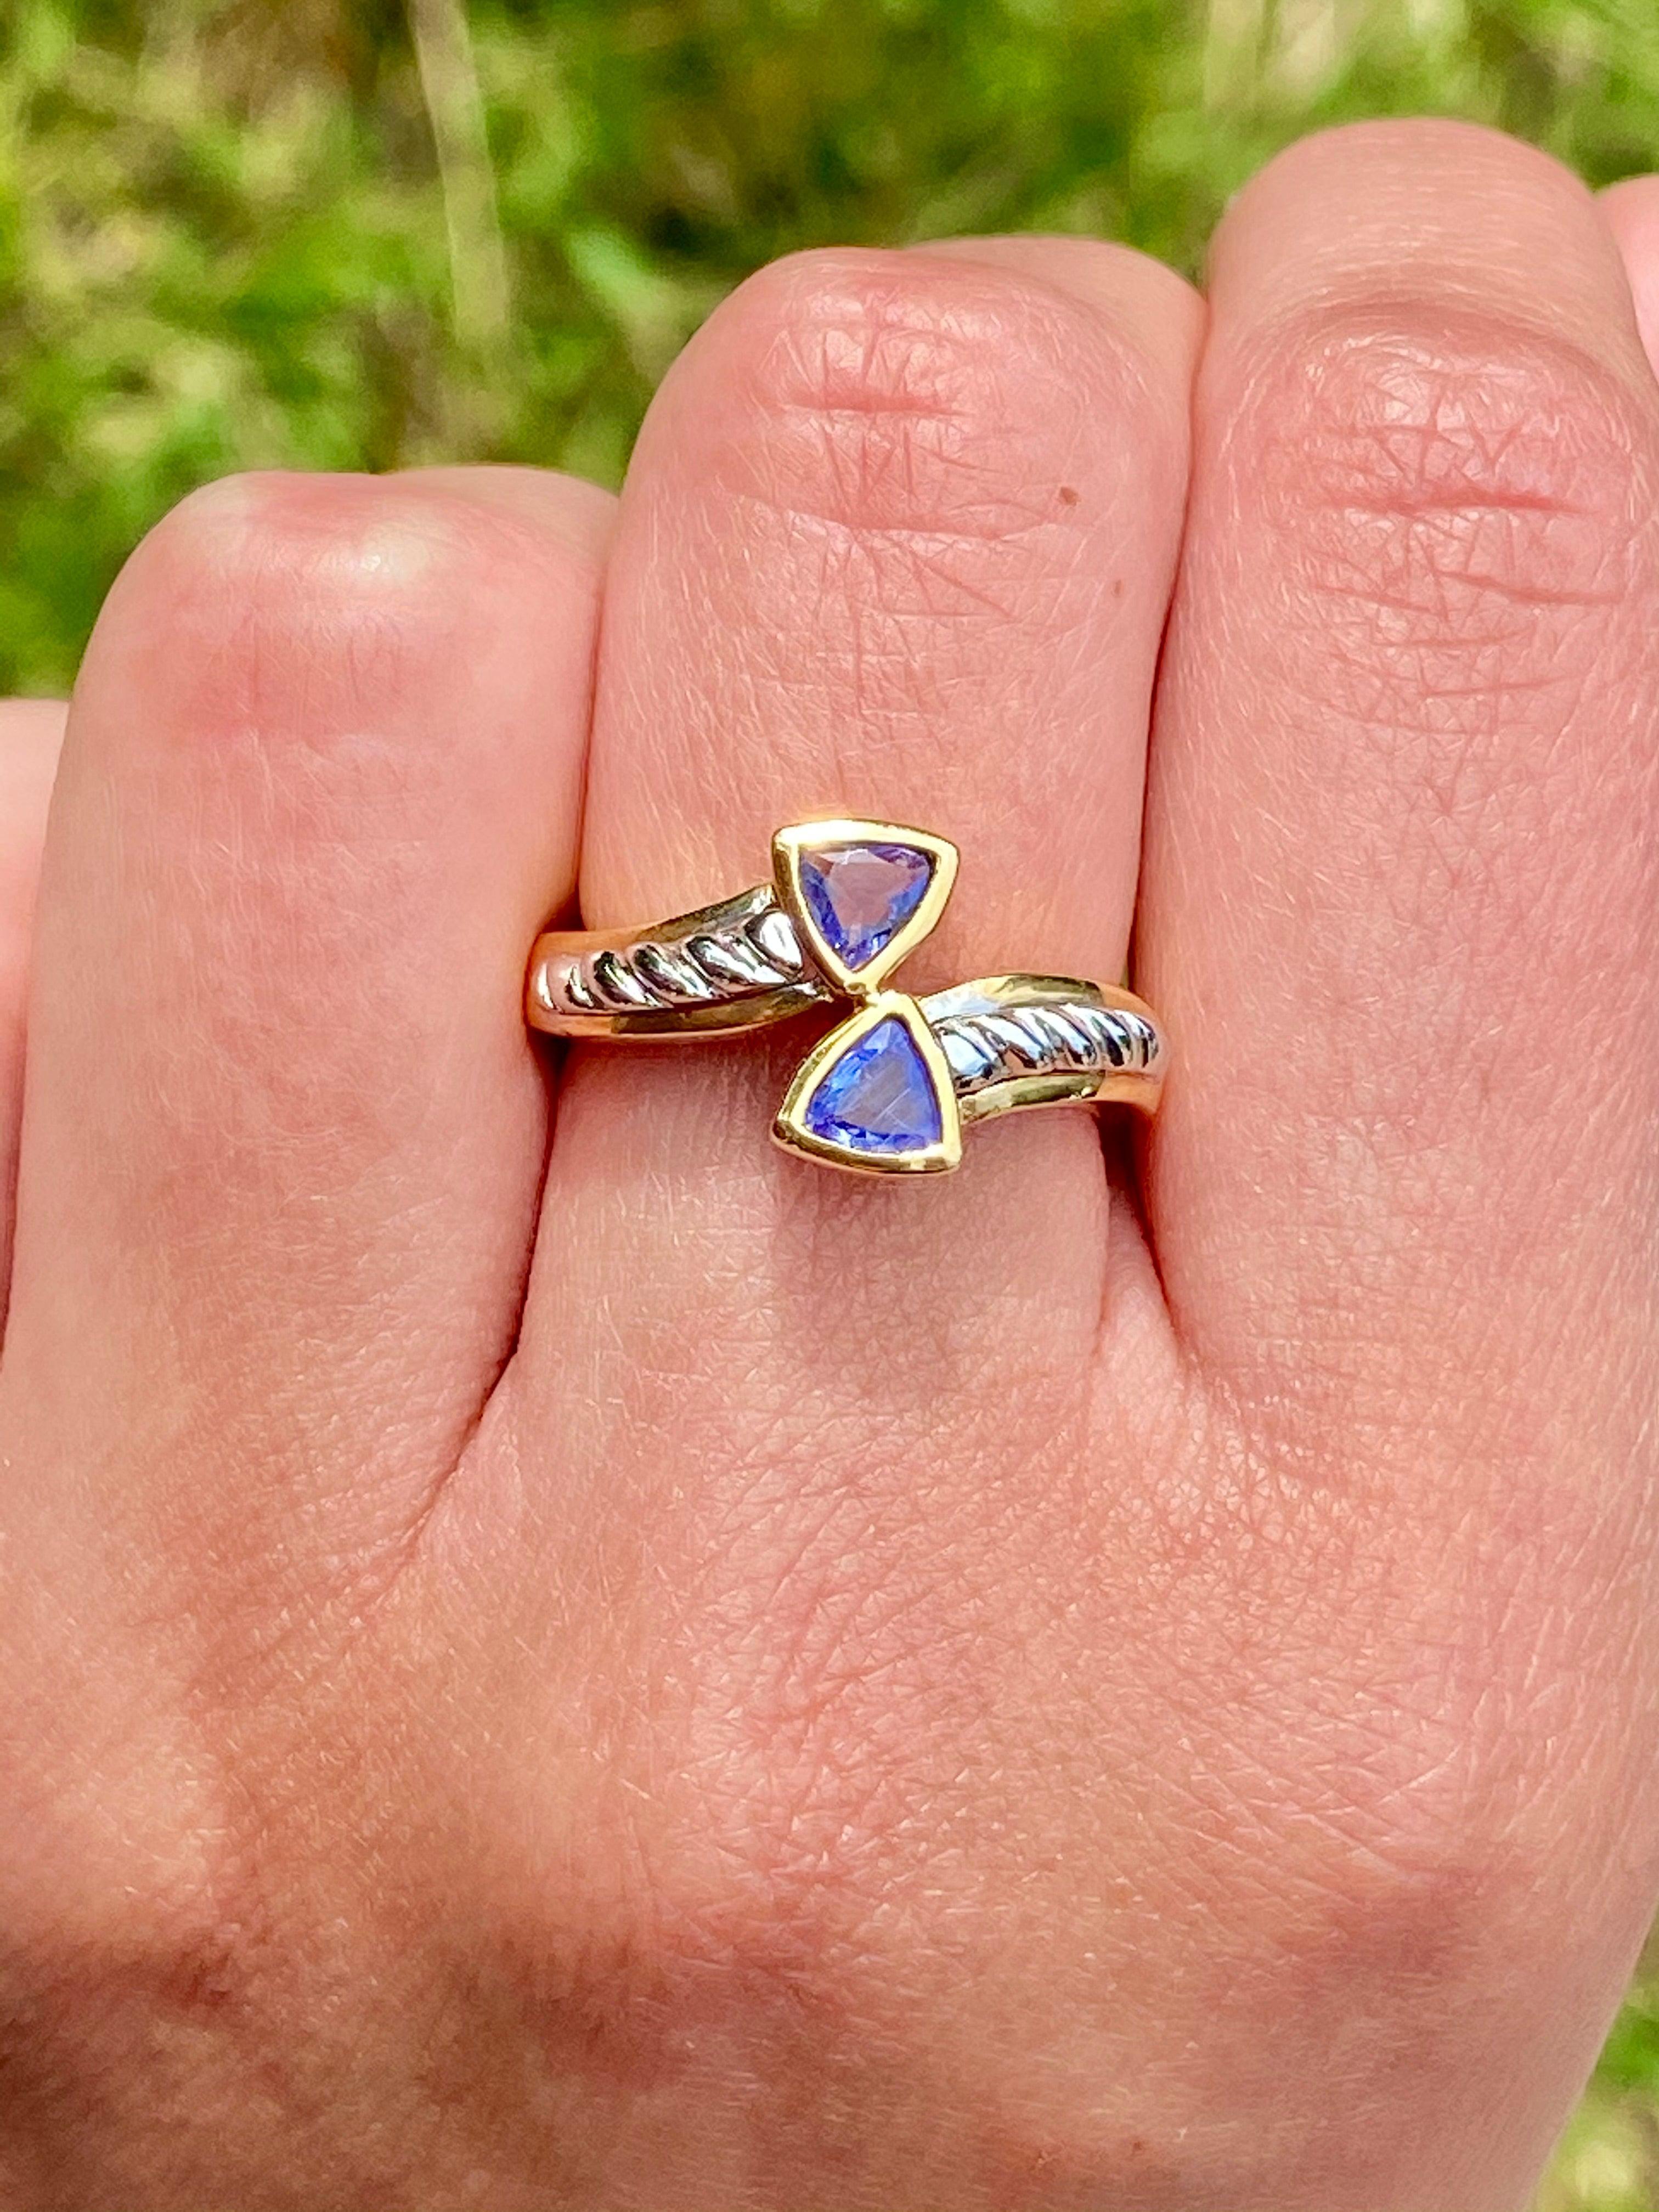 Curved Triangle Cut Tanzanite Ring in 14k Yellow and White Gold - ASSAY